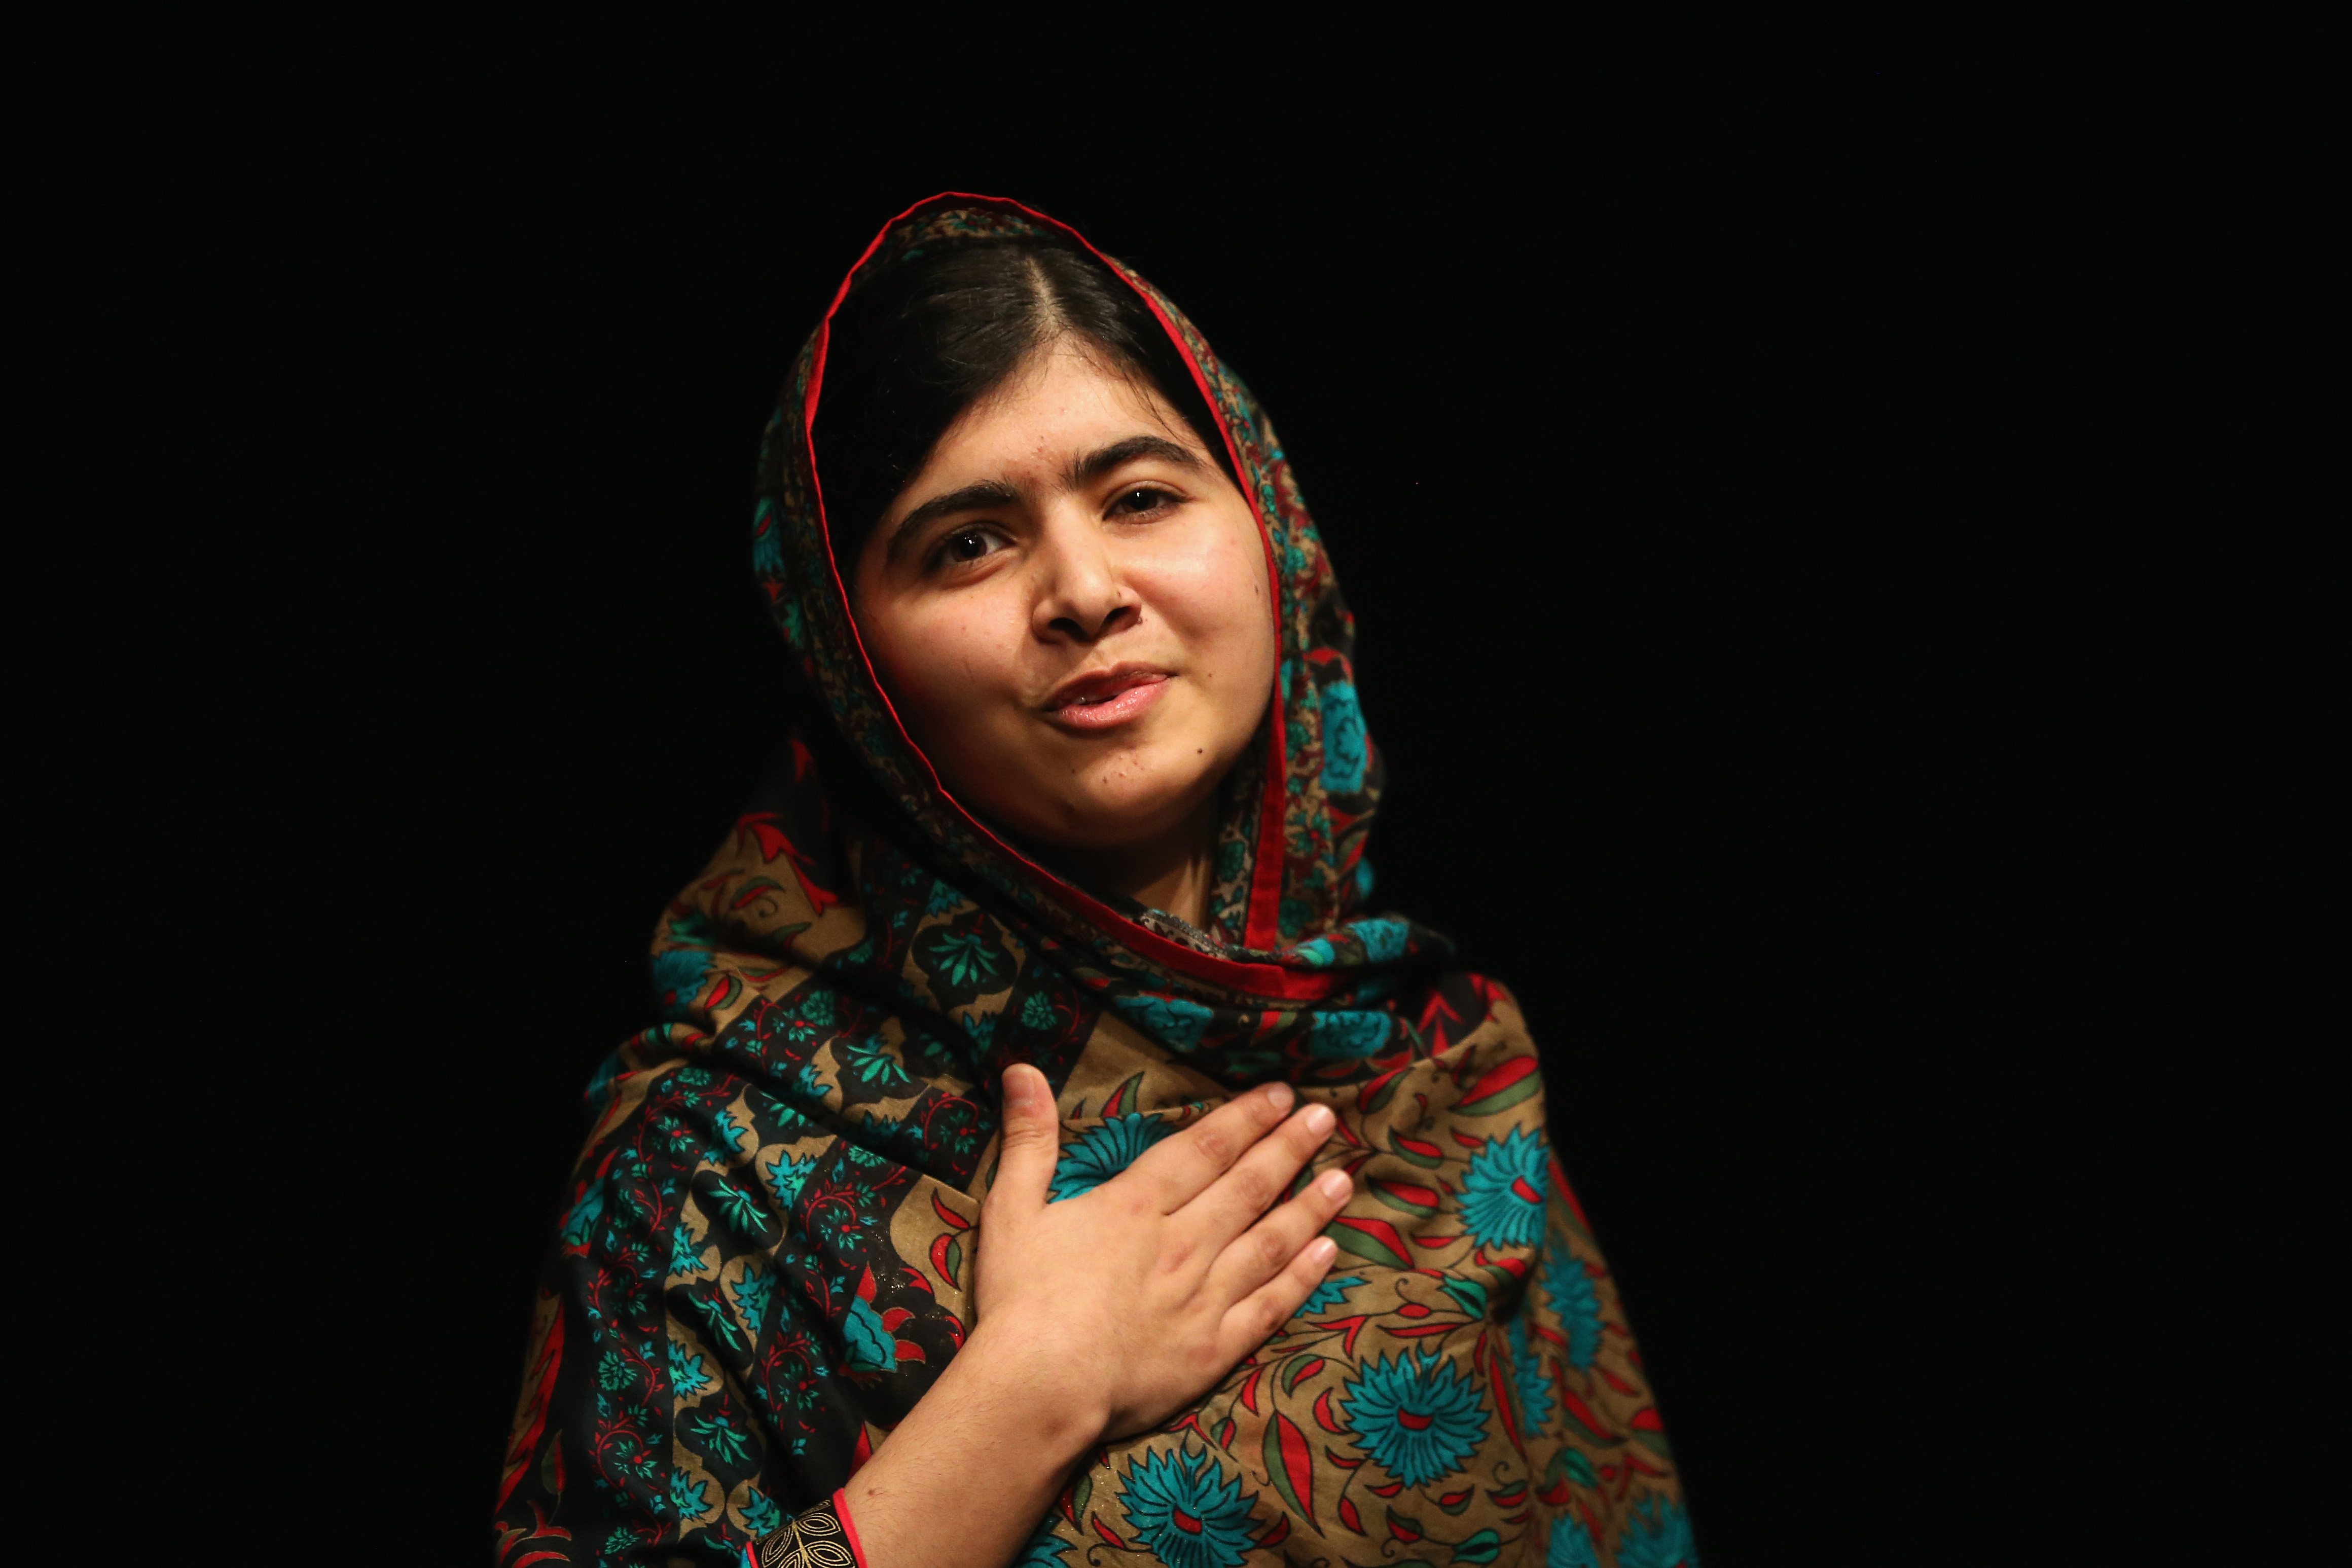 Malala Yousafzai acknowledges the crowd at a press conference at the Library of Birmingham after being announced as a recipient of the Nobel Peace Prize on Friday.